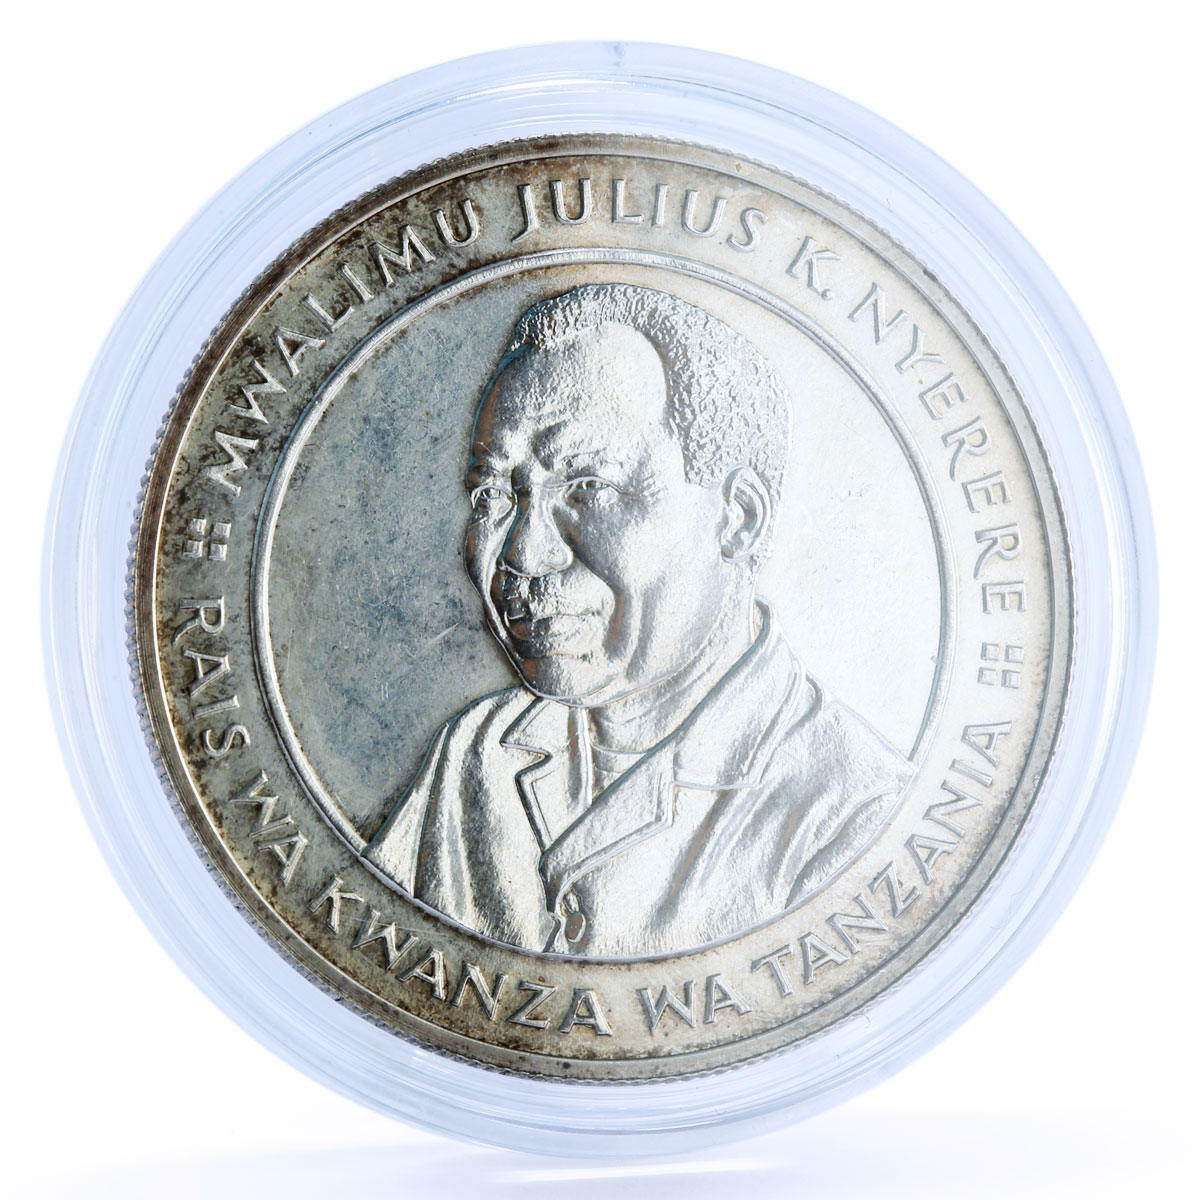 Tanzania 200 shillings Independence President Julius Nyerere silver coin 1981